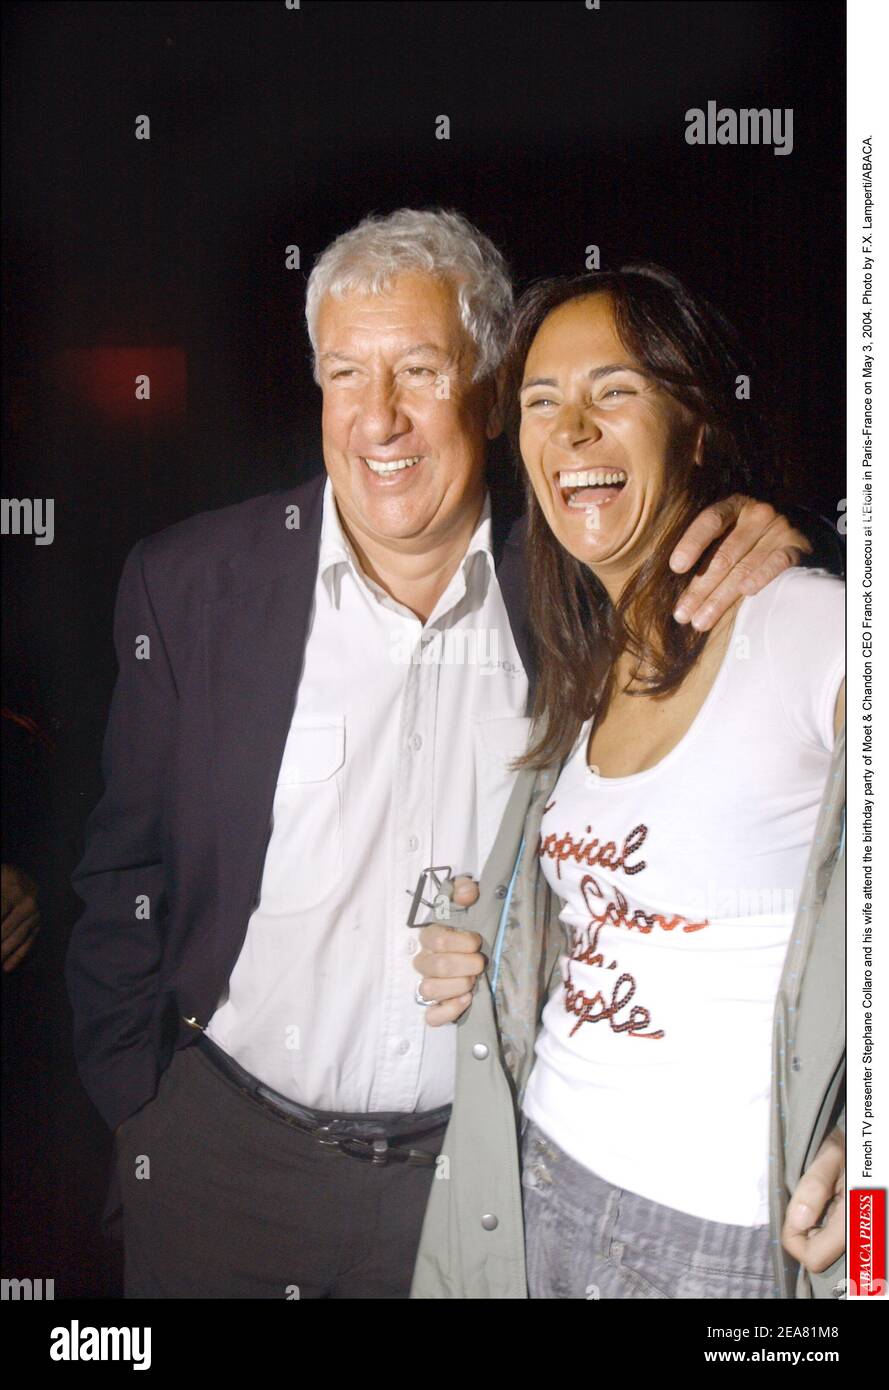 French TV presenter Stephane Collaro and his wife attend the birthday party of Moet & Chandon CEO Franck Couecou at L'Etoile in Paris-France on May 3, 2004. Photo by F.X. Lamperti/ABACA. Stock Photo